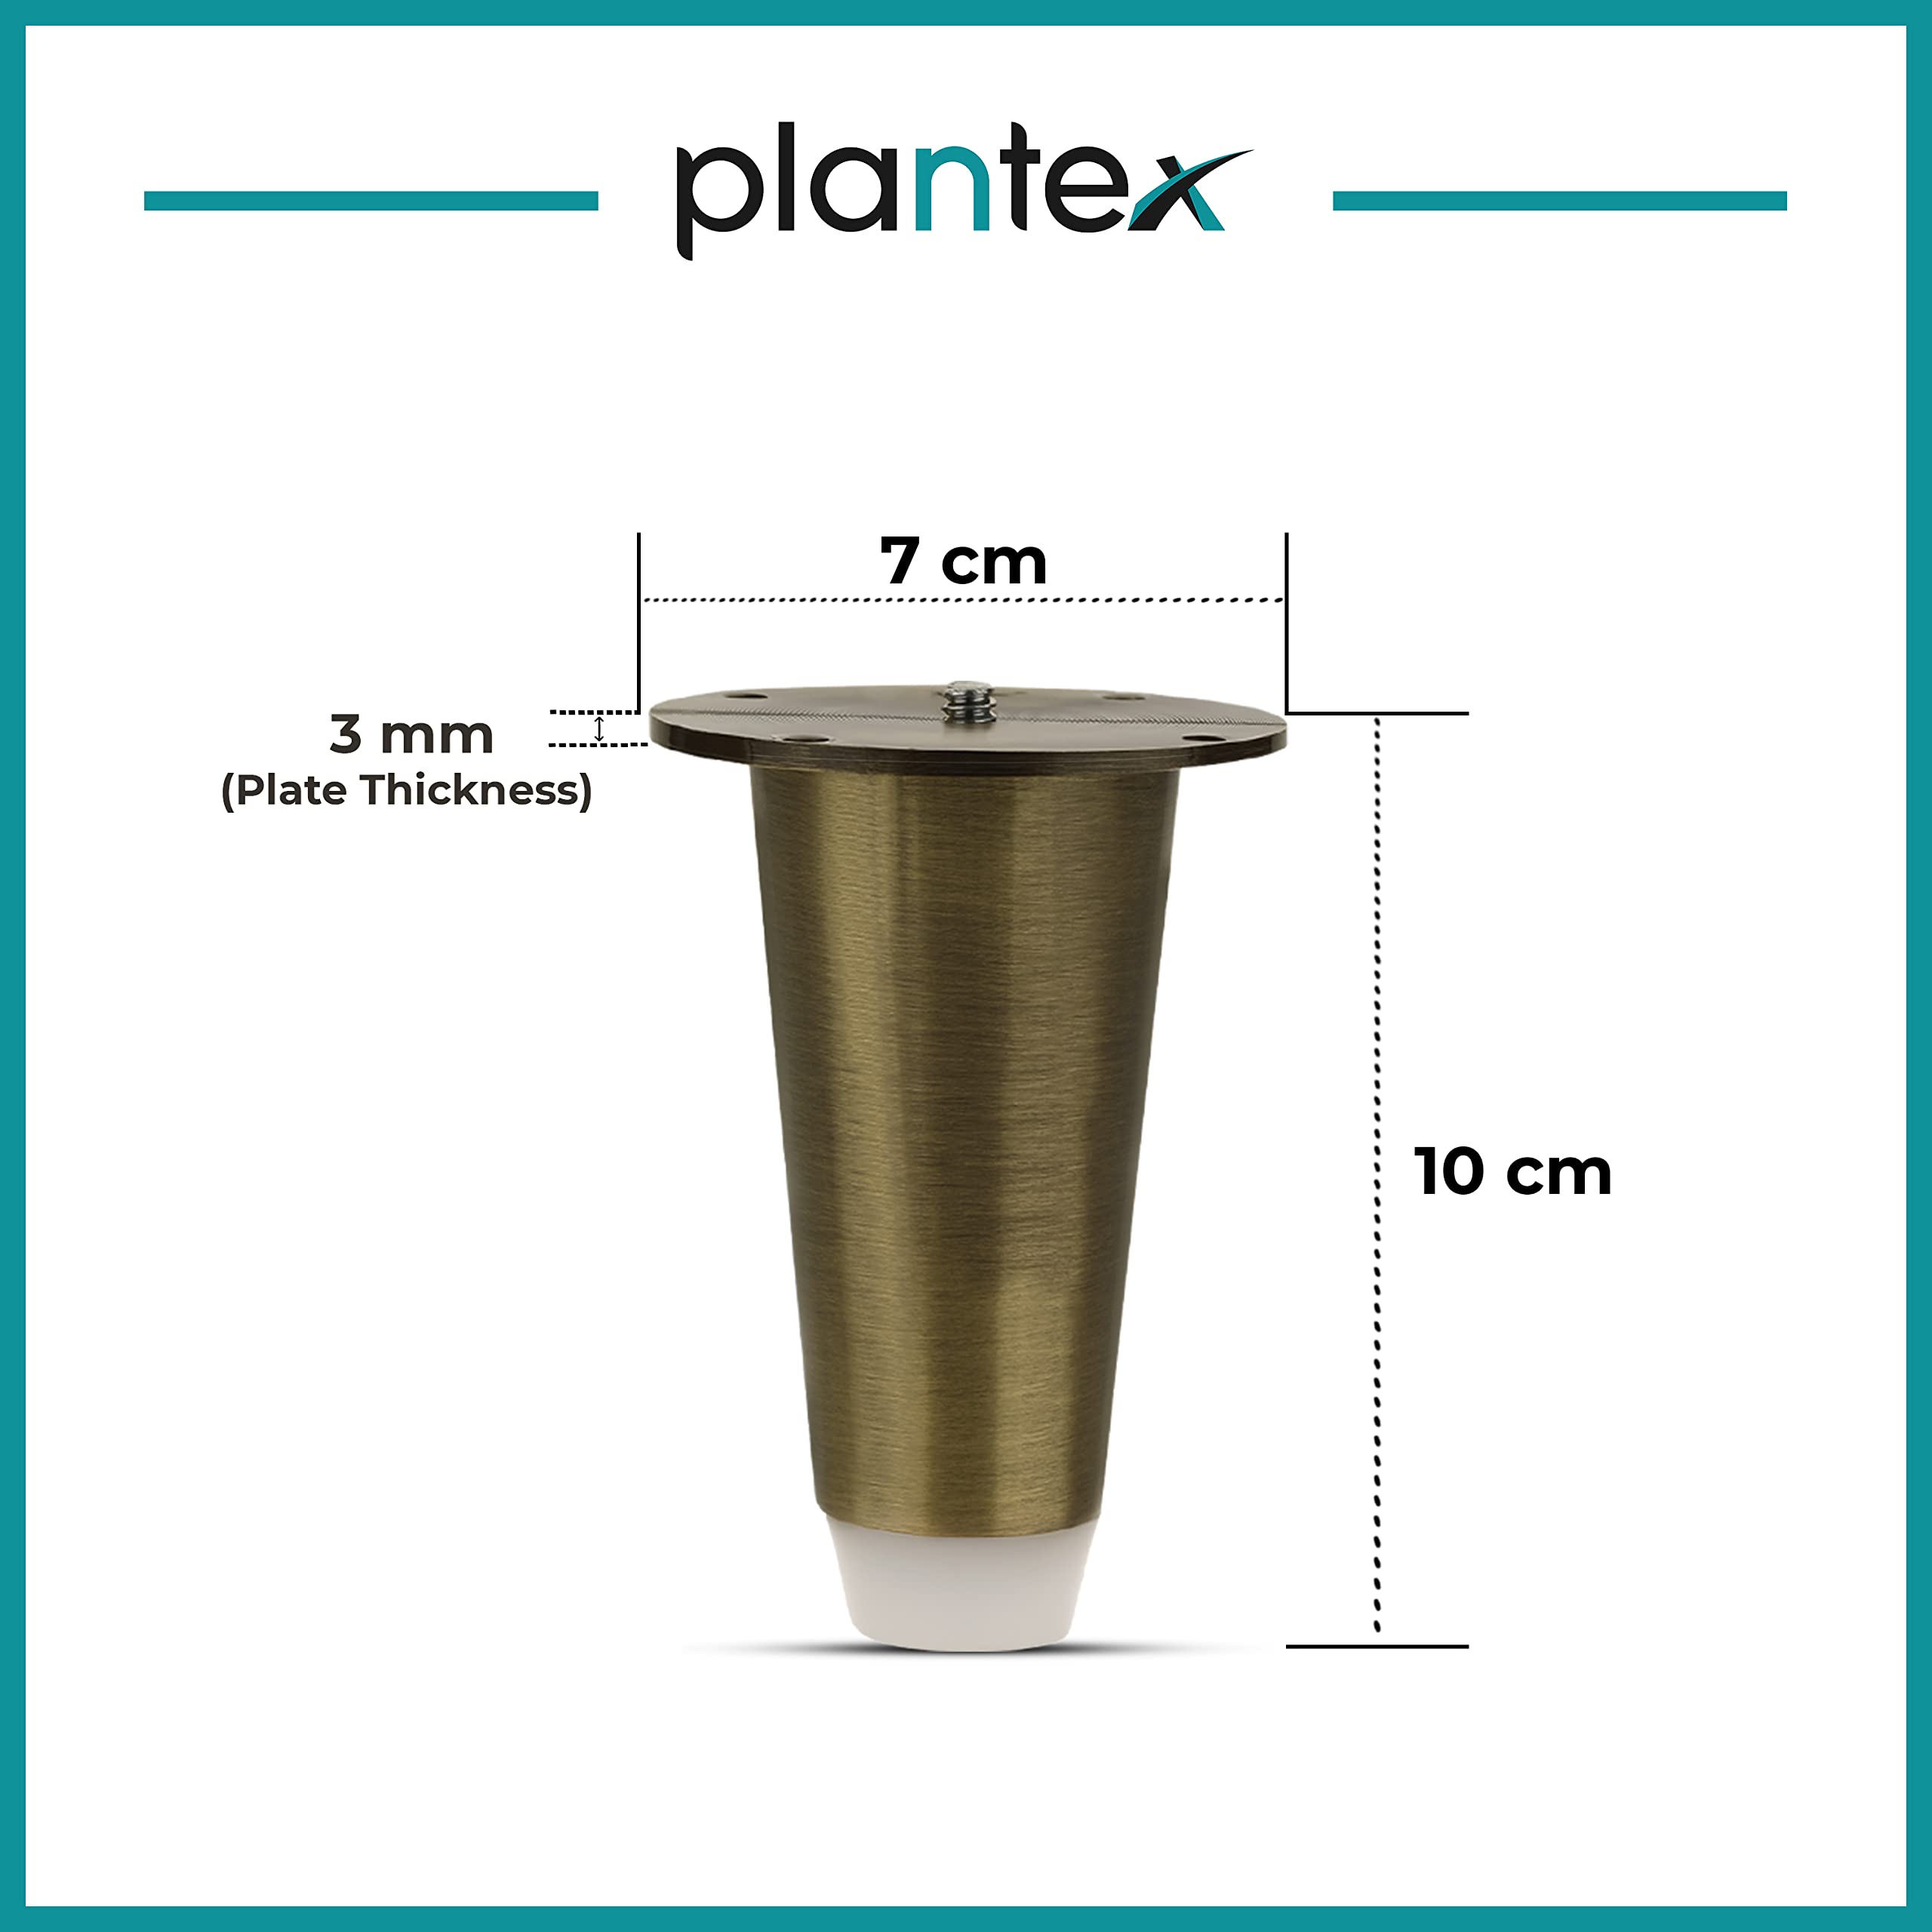 Plantex Heavy Duty Stainless Steel 4 inch Sofa Leg/Bed Furniture Leg Pair for Home Furnitures (DTS-53, Brass Antique) – 10 pcs